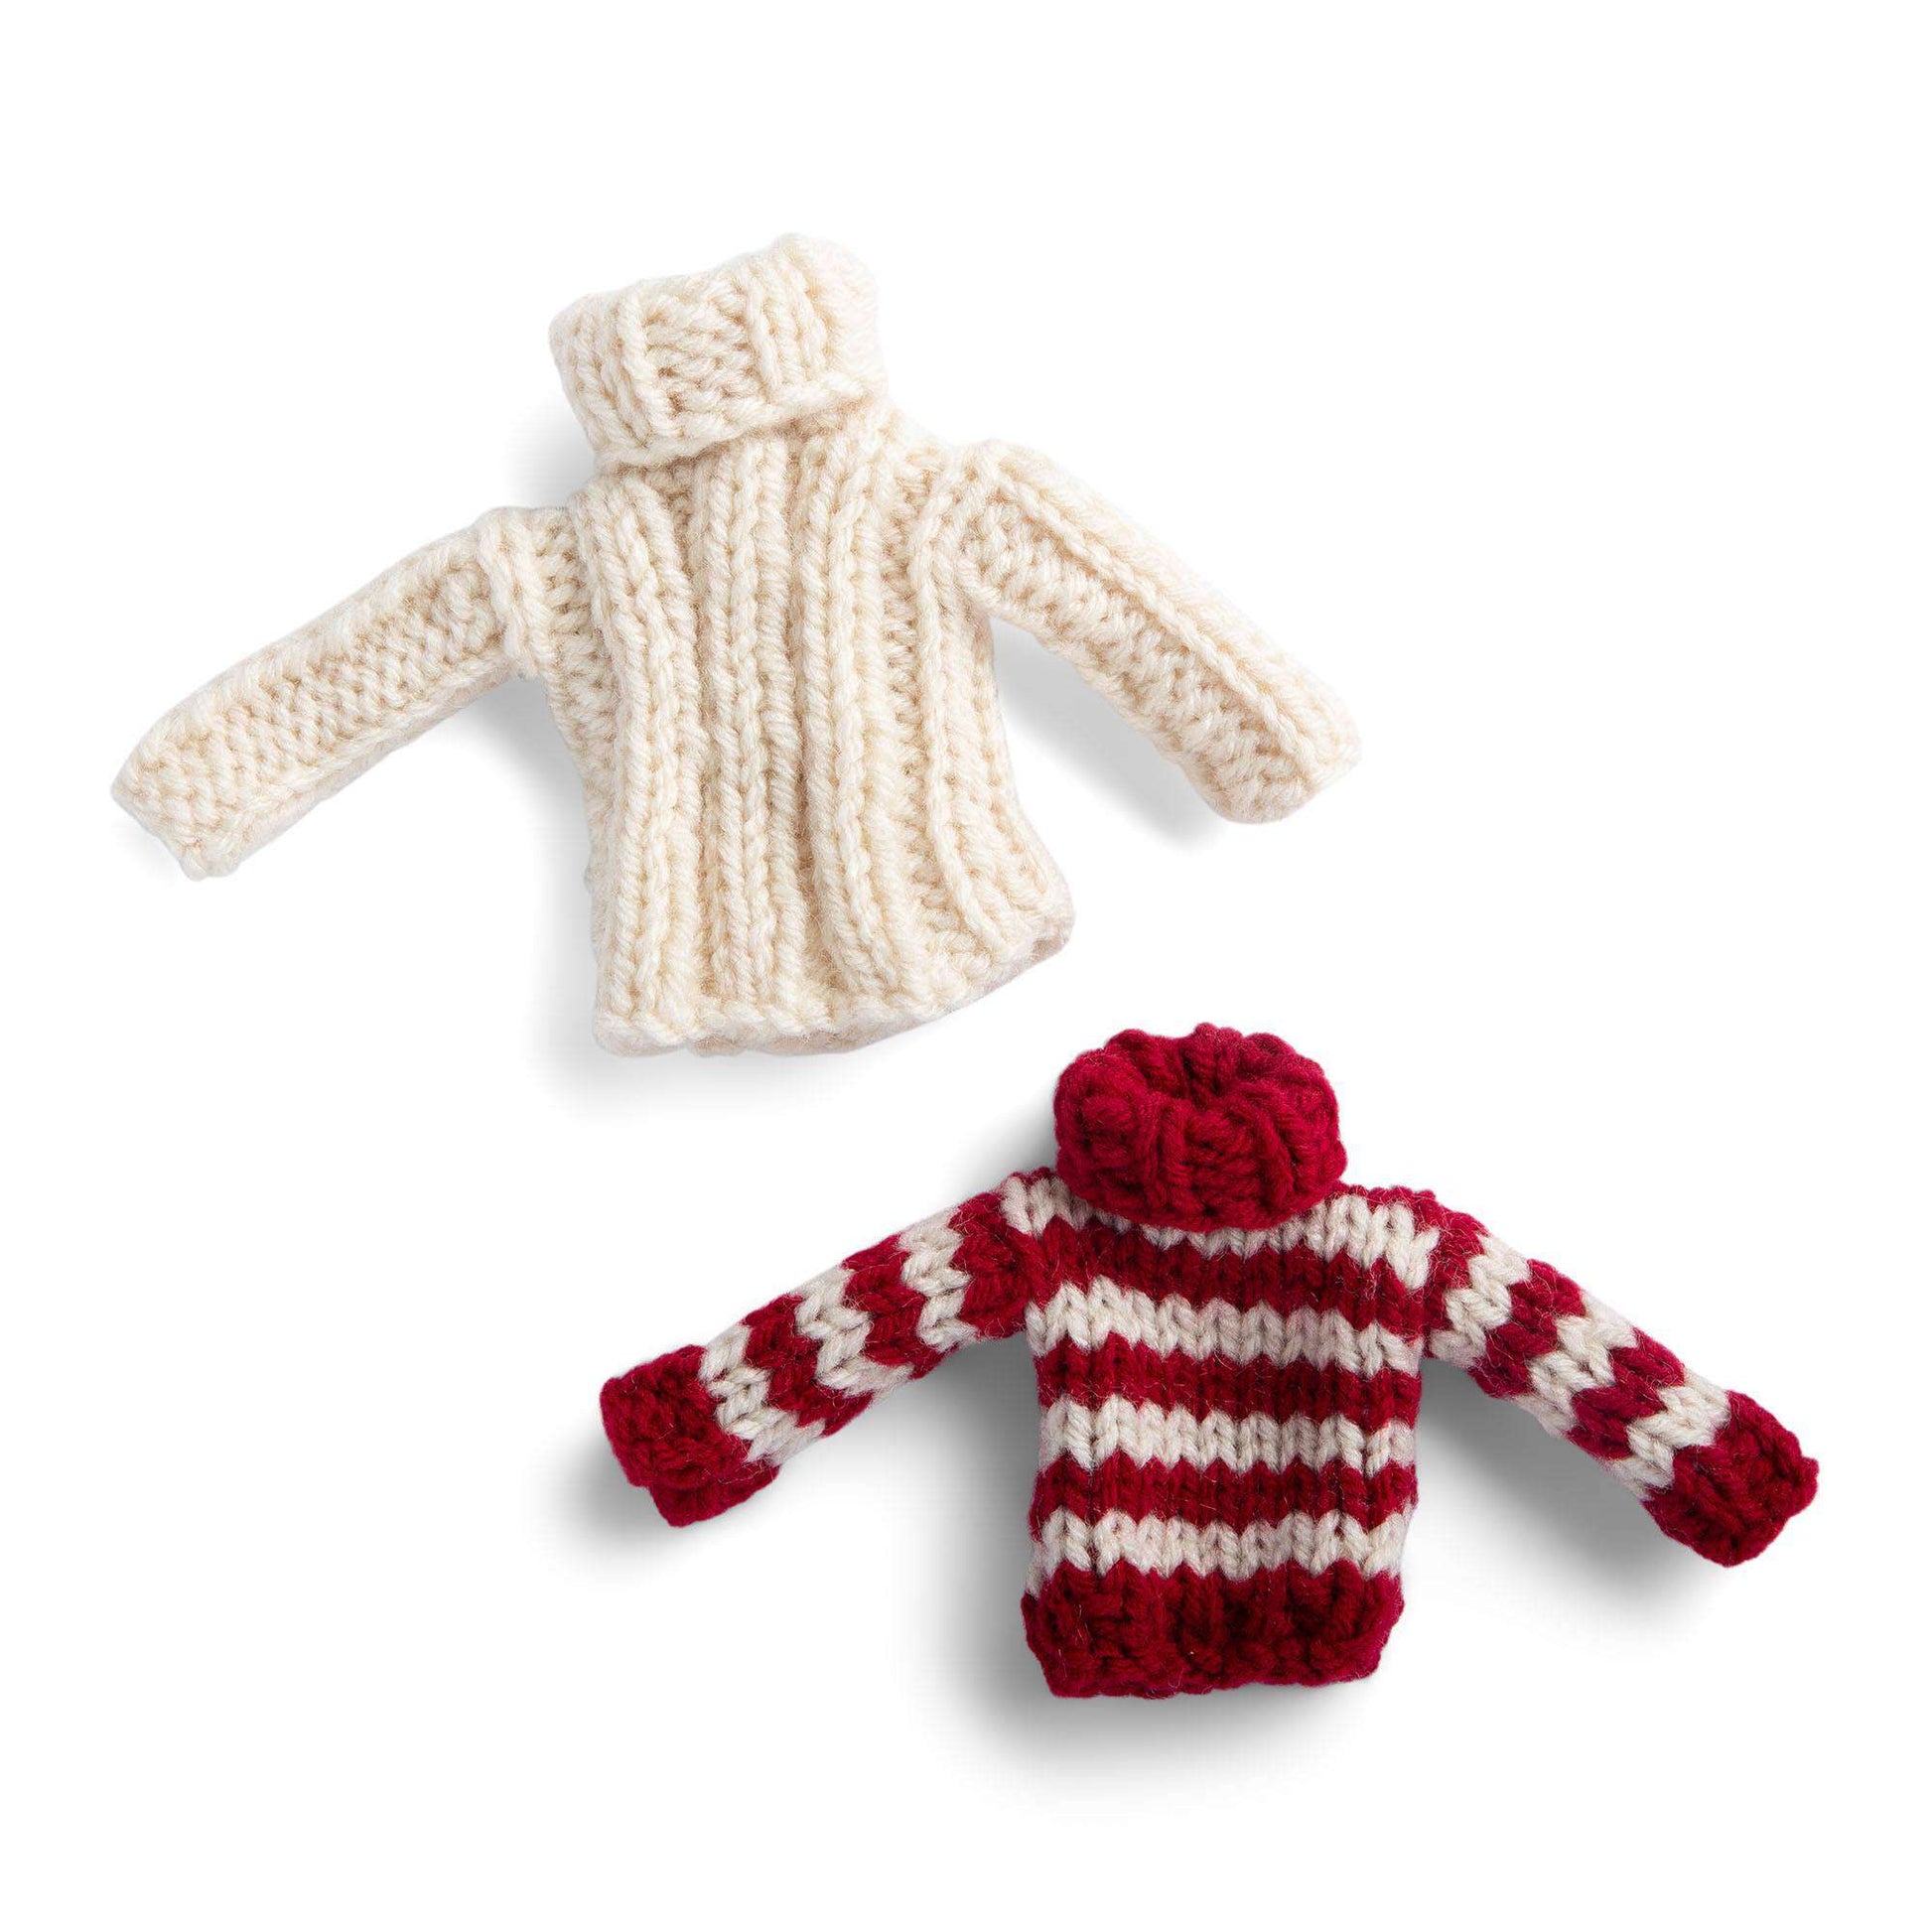 Red Heart Knit Mini Holiday Sweater Ornaments Version 1